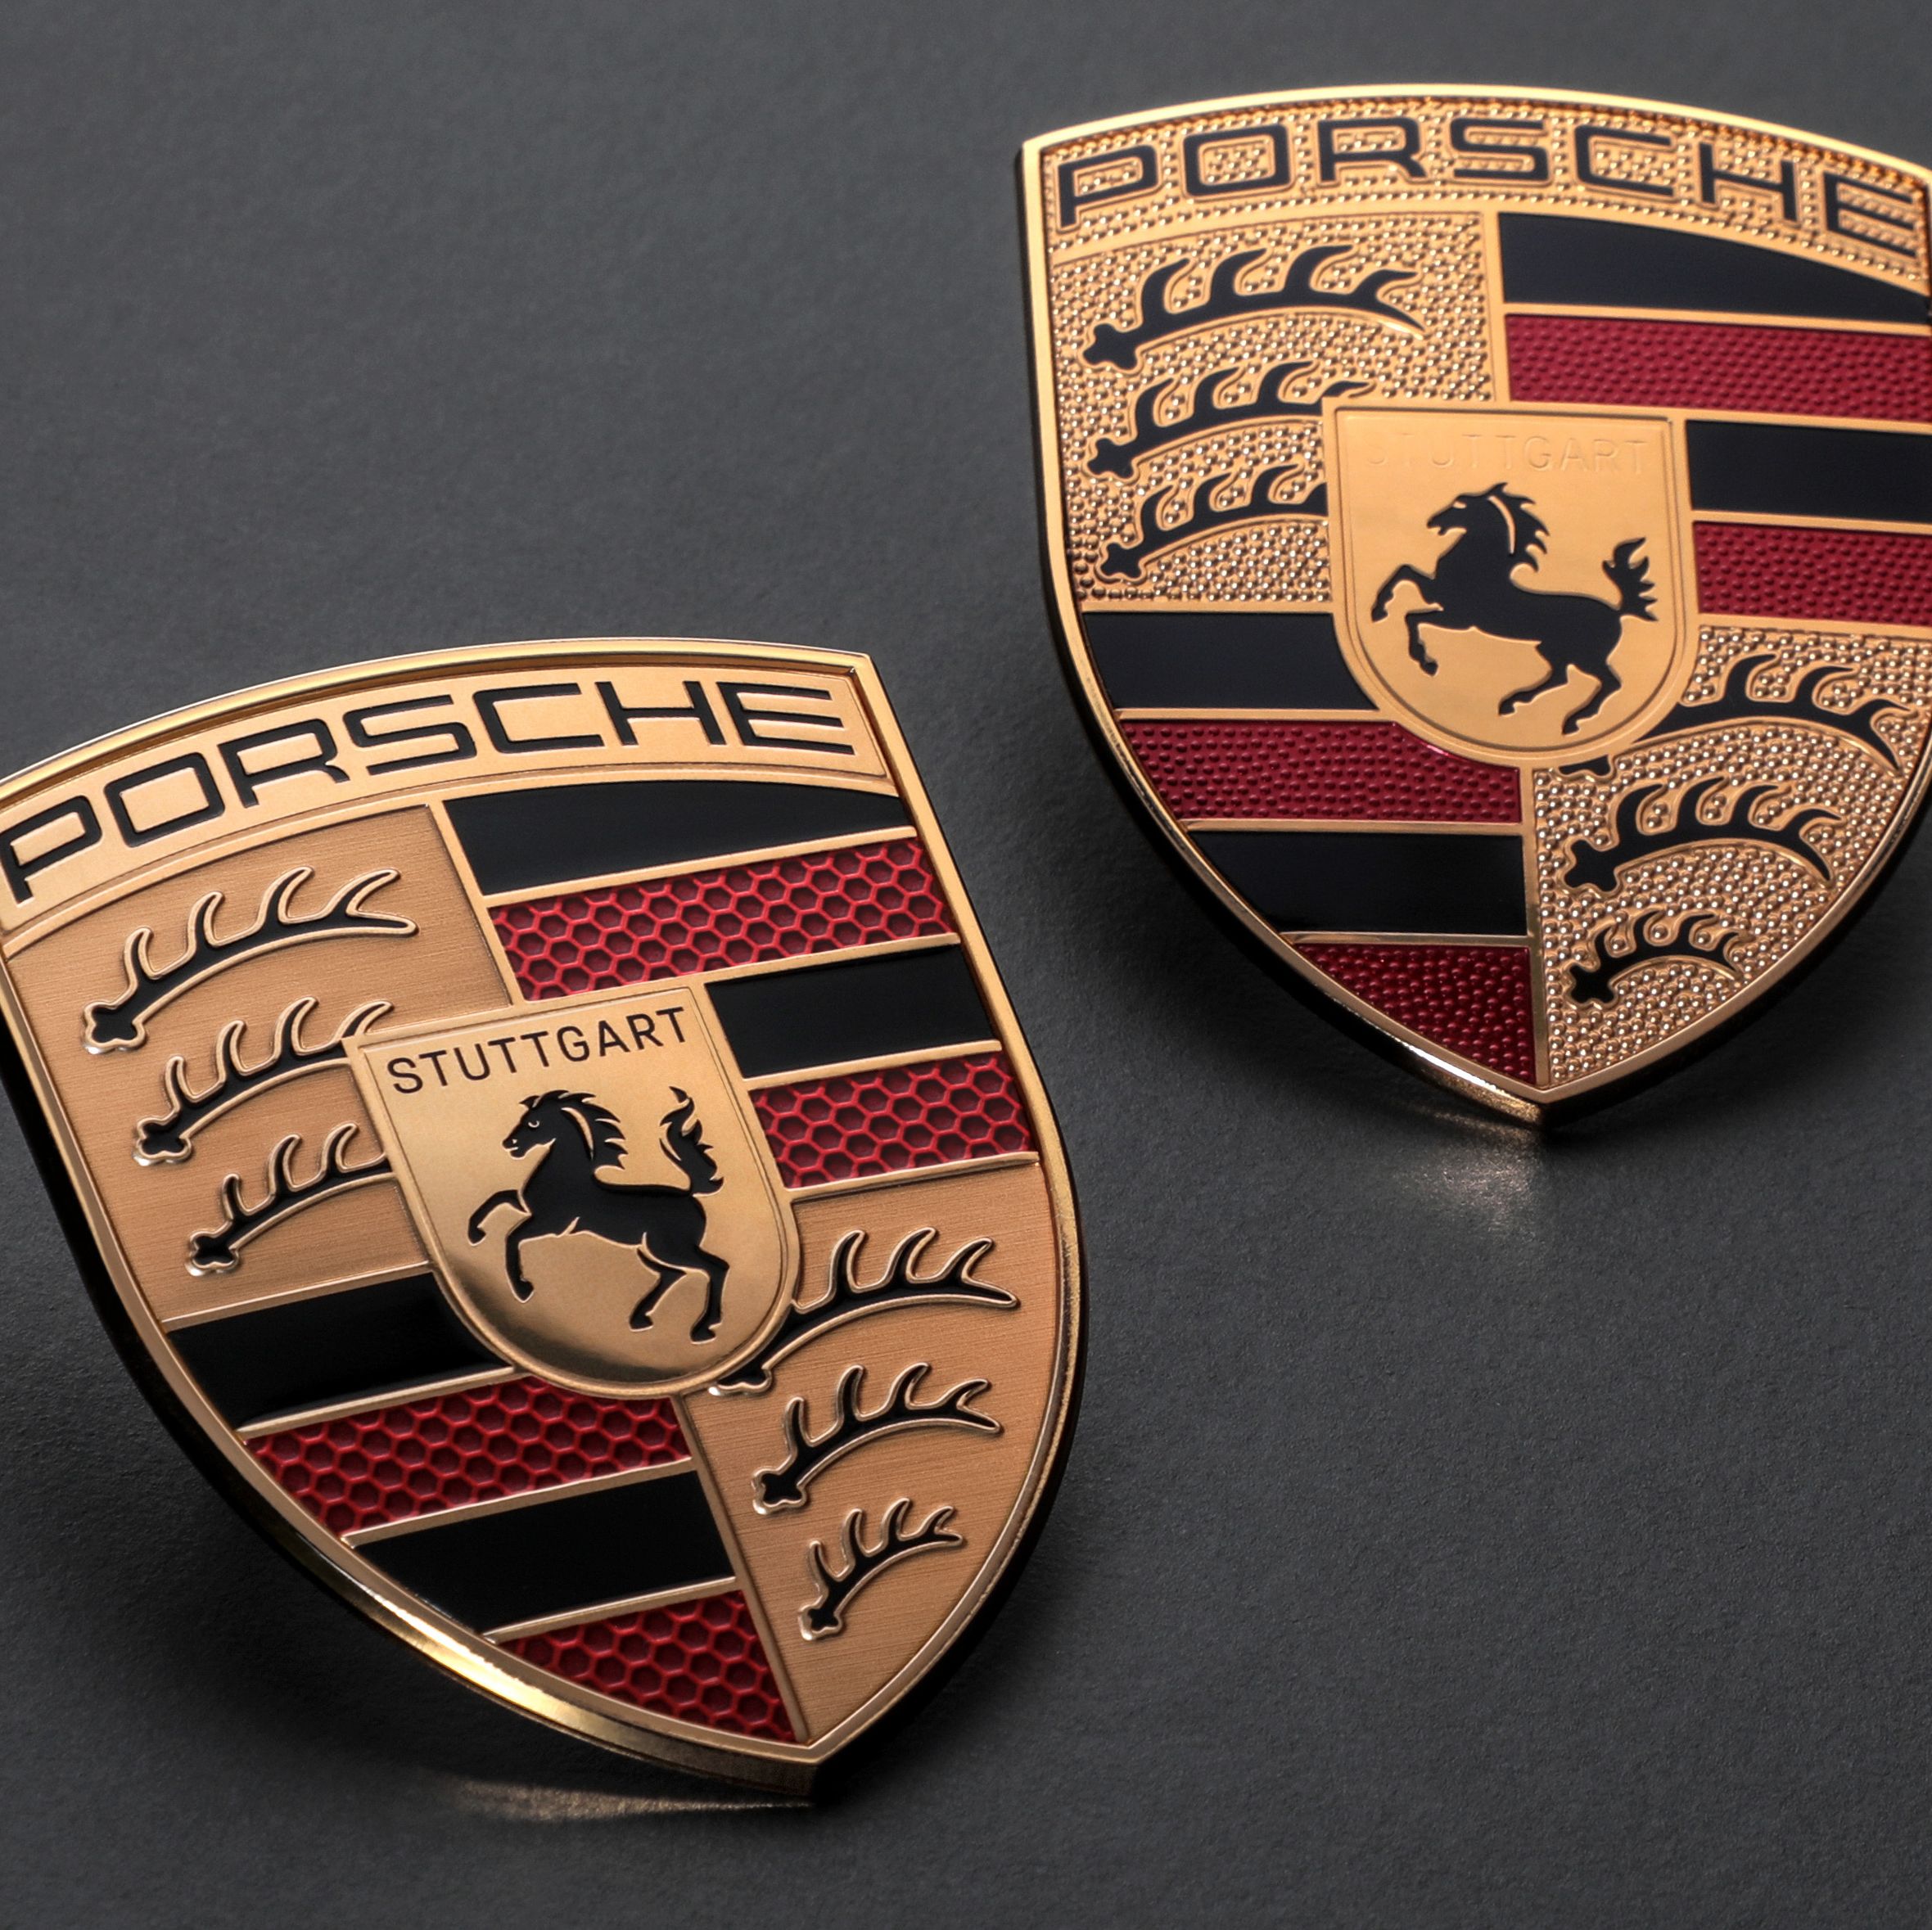 Can You Spot the Differences in Porsche's Updated Crest?